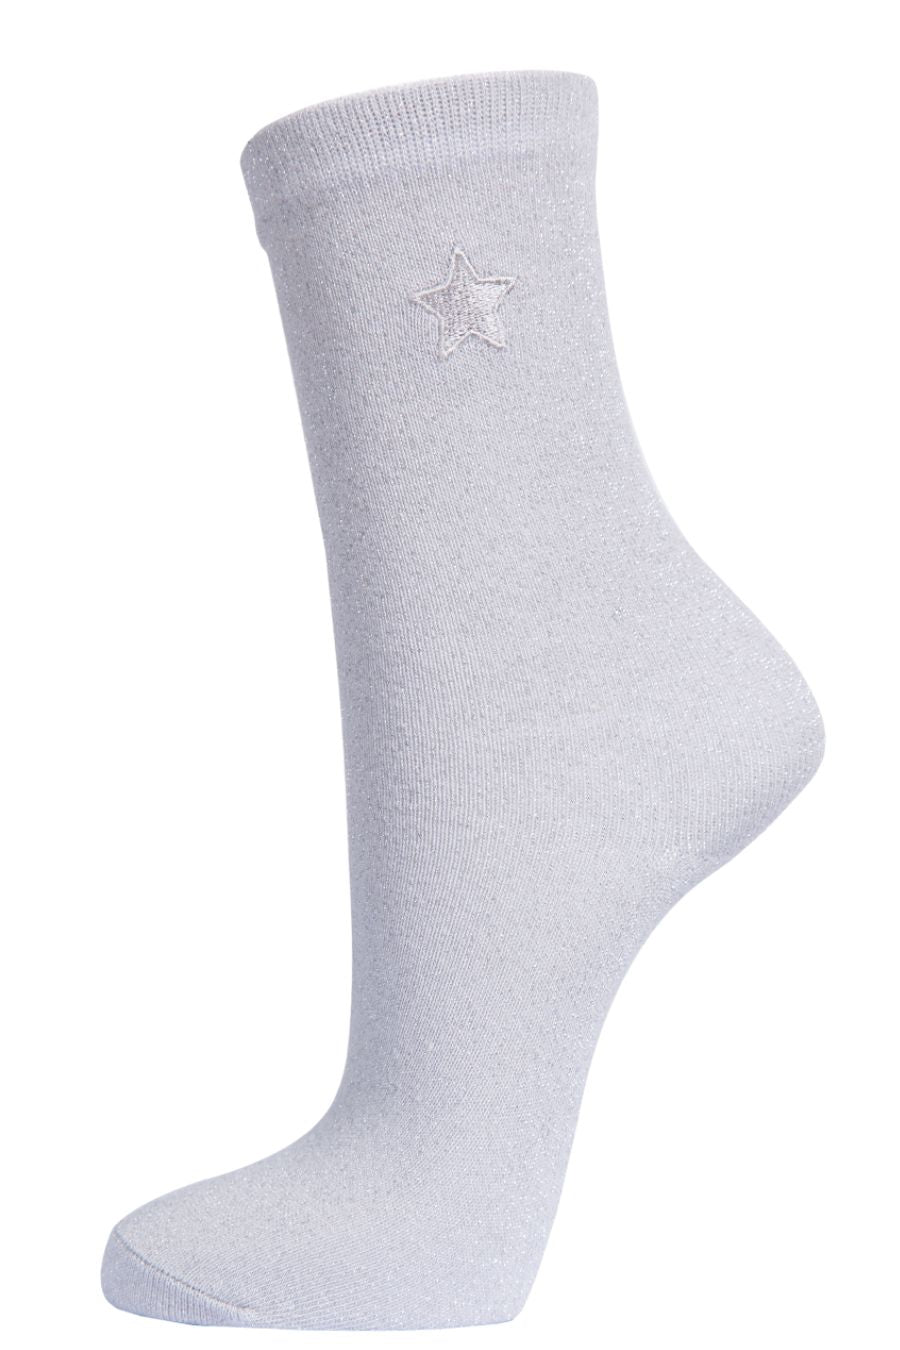 white and silver glitter socks with an embroidered star on the ankle